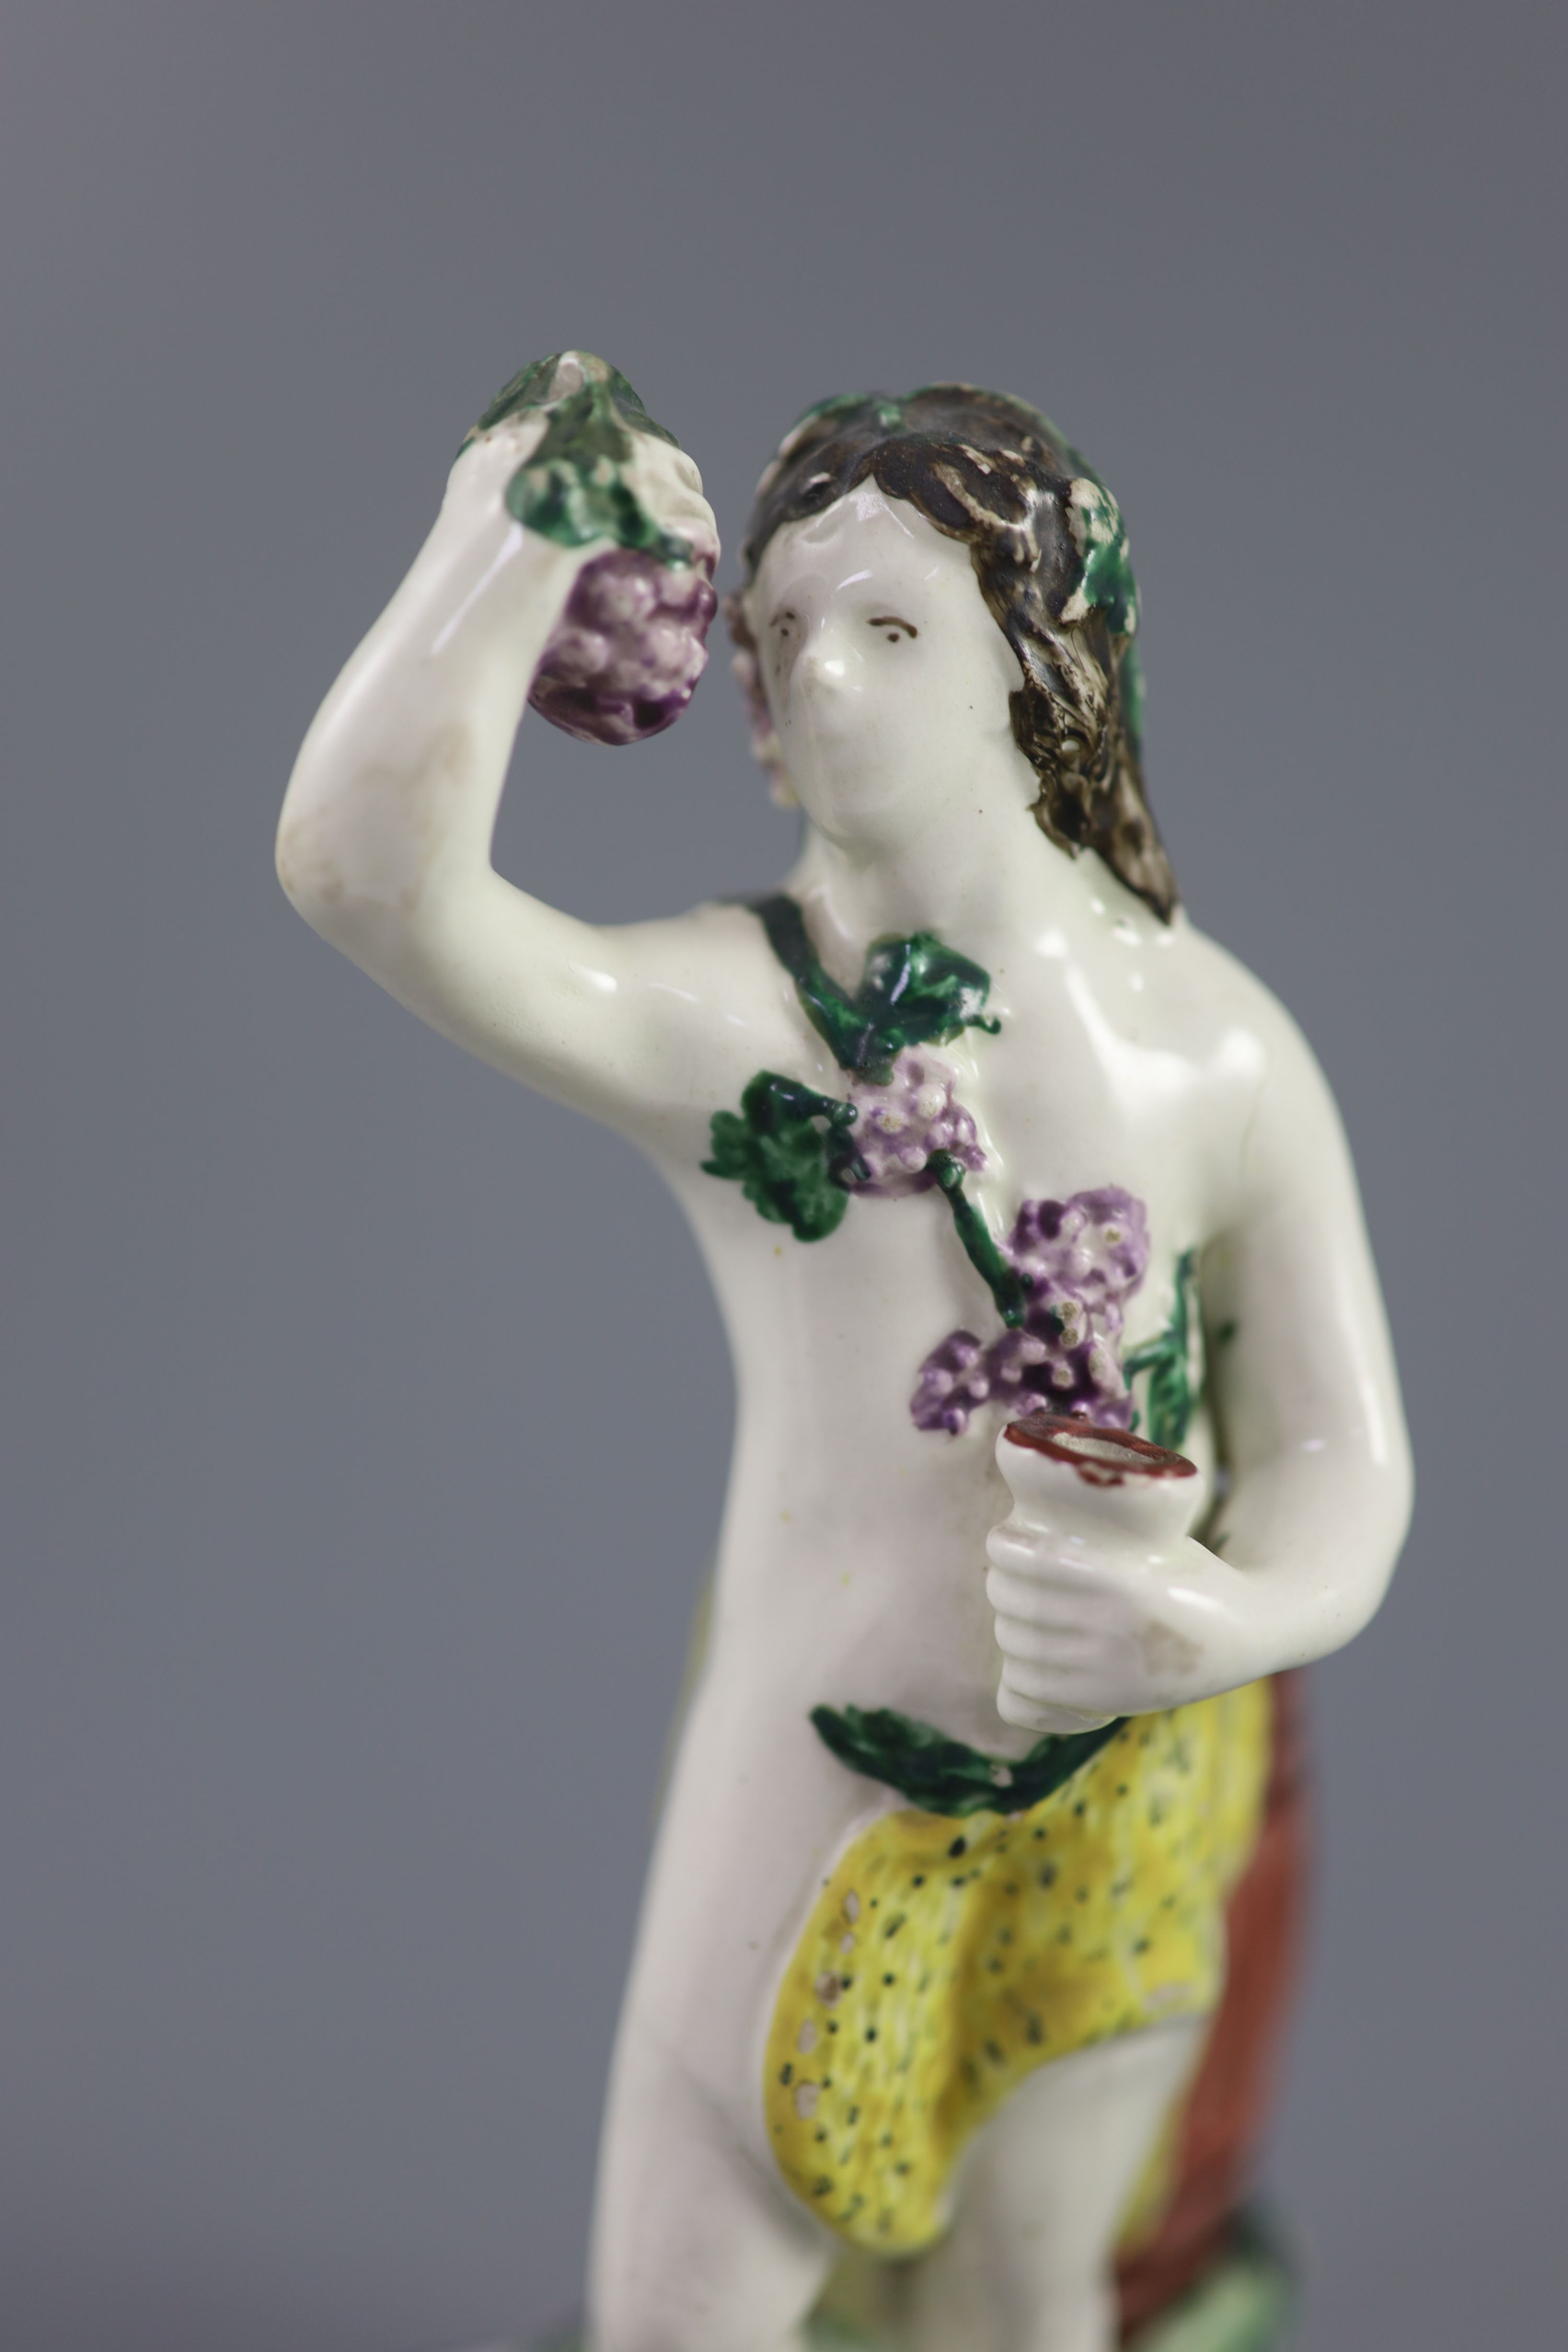 An enamelled creamware figure of Bacchus, attributed Leeds Pottery, c.1790-1800, 17.5cm high